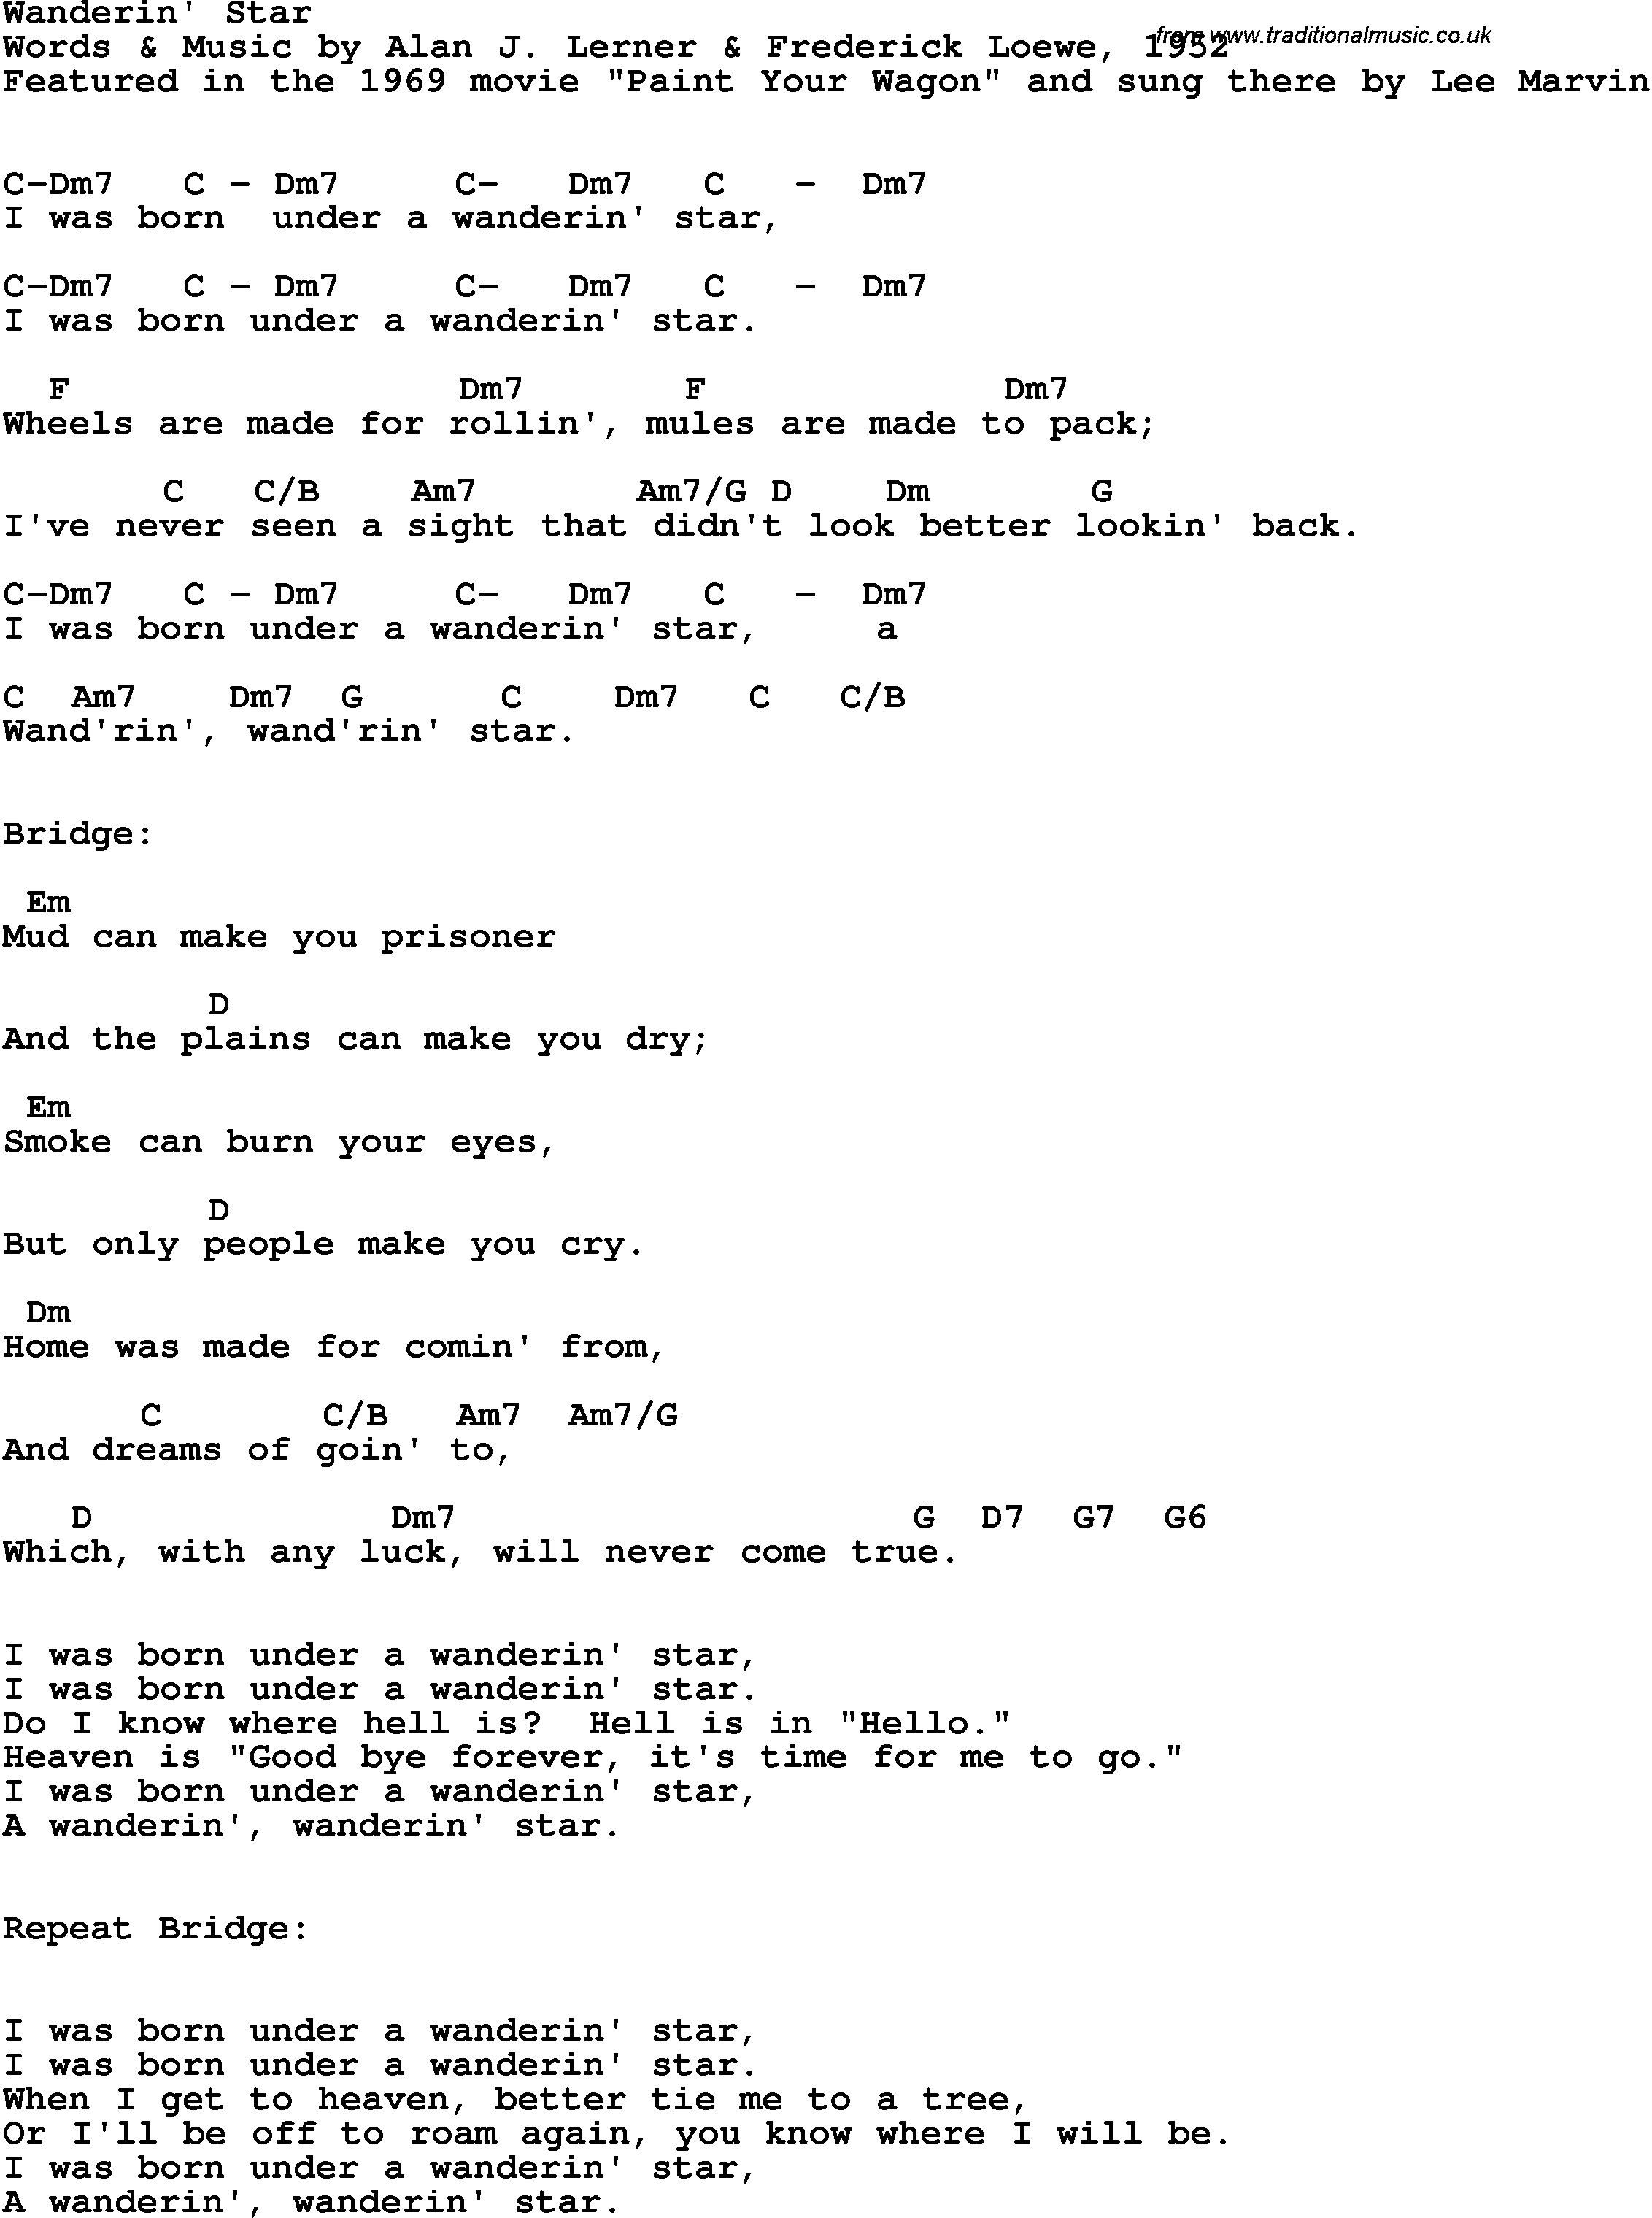 Song Lyrics with guitar chords for Wanderin' Star - Lee Marvin, 1969